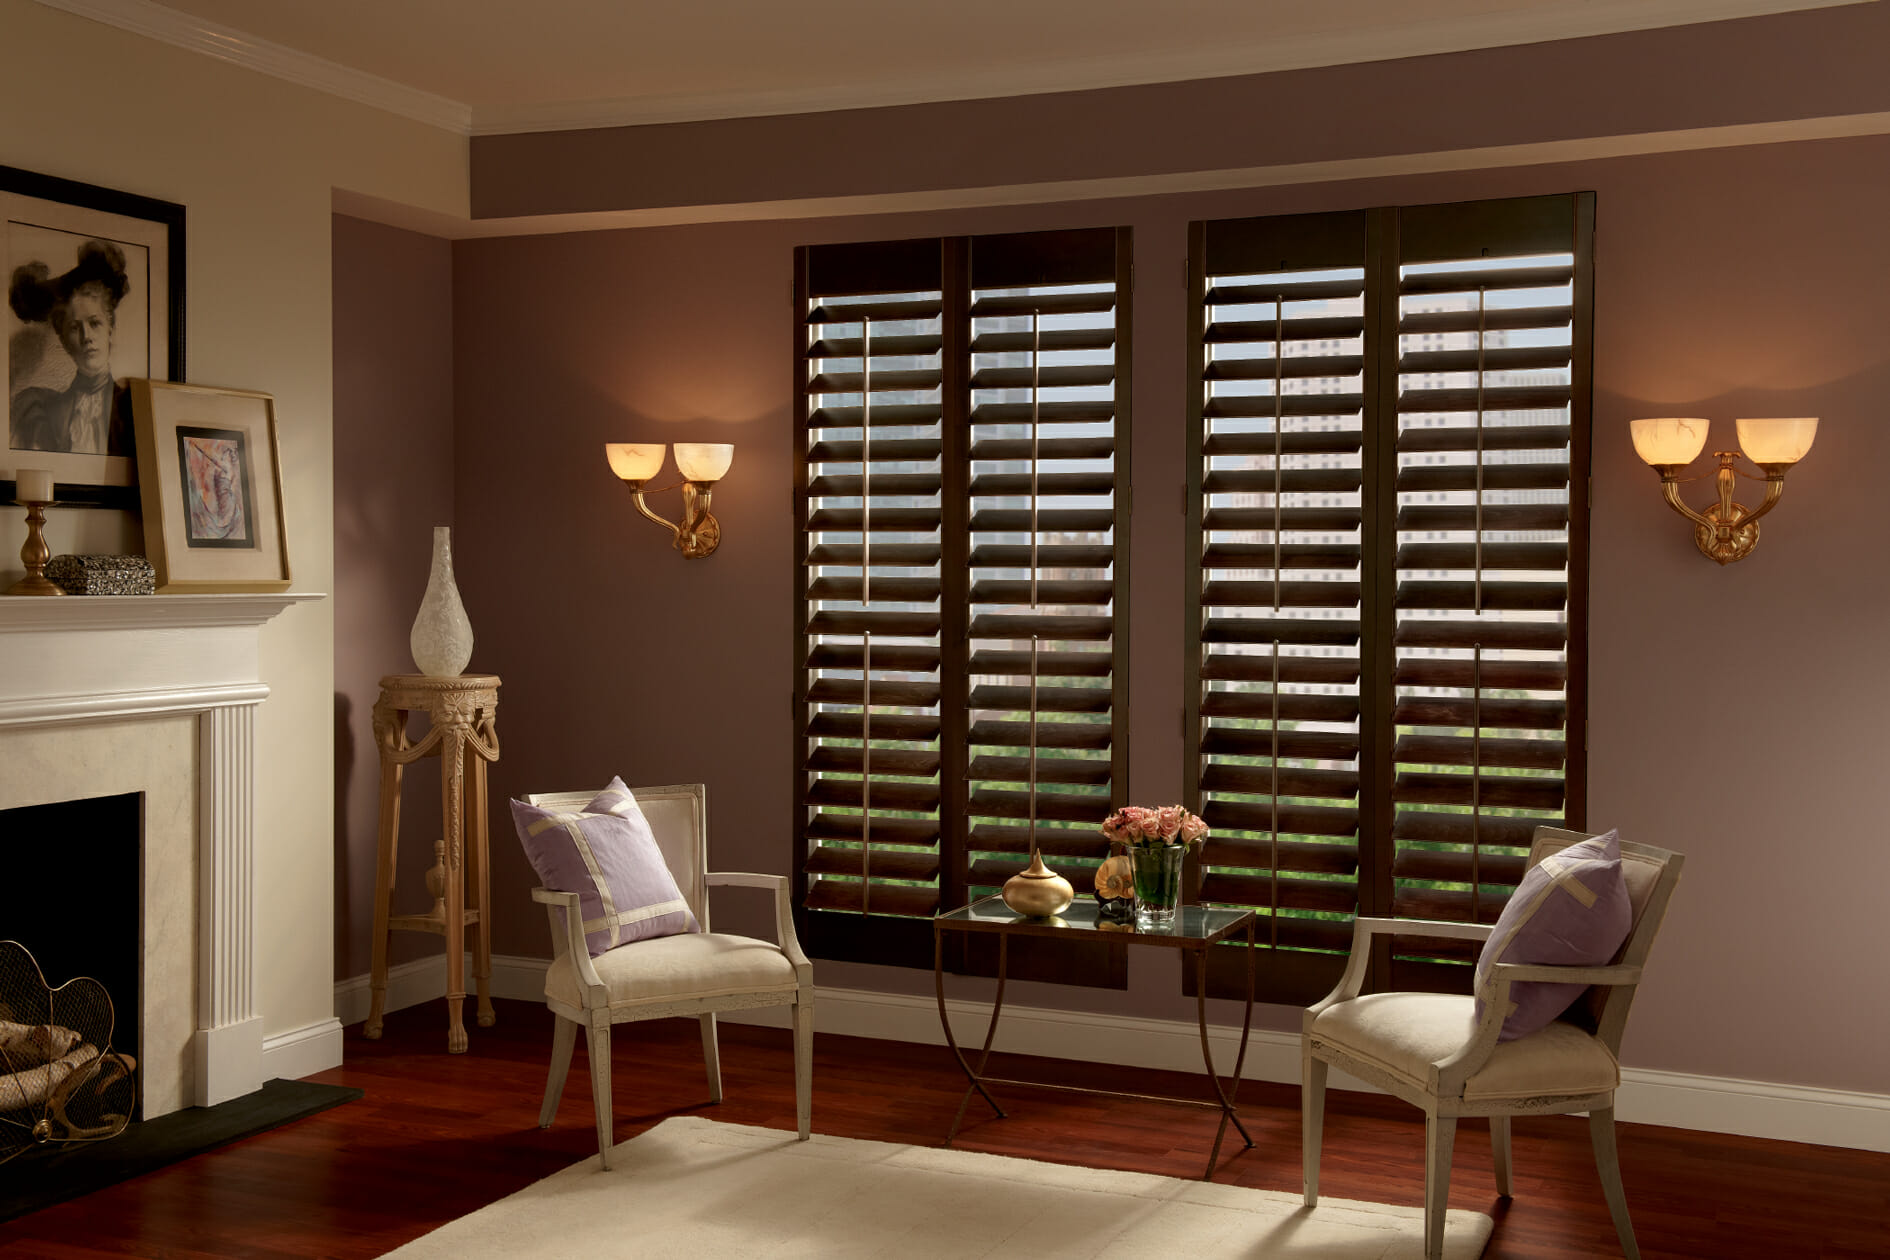 plantation shutters from graber window treatments id gws0806 rn041210ca Do Plantation Shutters Reduce Noise? All You Need to Know